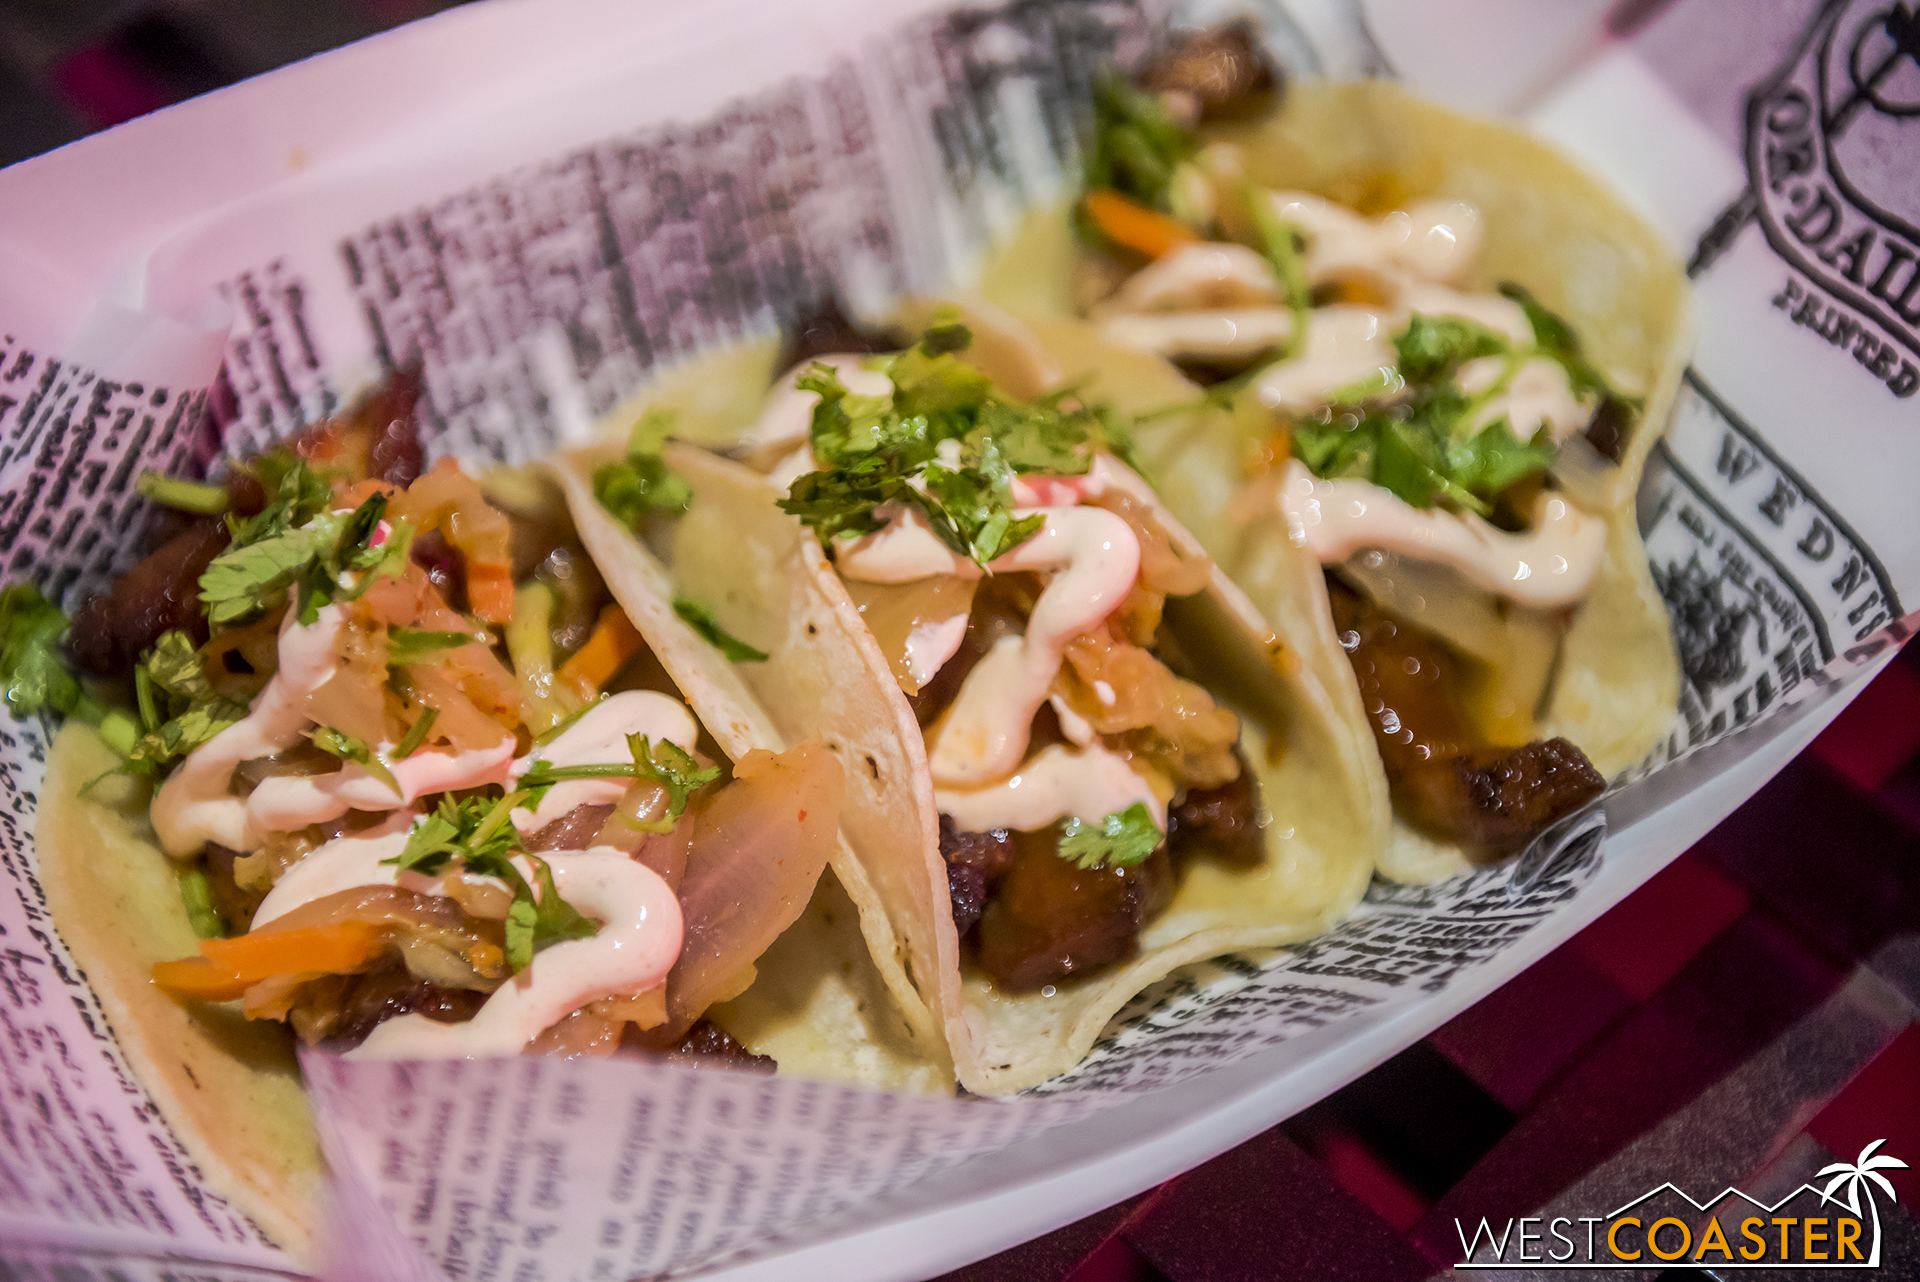  The Studio Catering Truck at the back of Hollywood Land has these Fire Dragon Tacos—pork belly tacos with kimchi slaw, Korean BBQ sauce, and Sriracha crema.  Unfortunately, the pork belly wasn’t really that tender, though I liked the overall flavor.